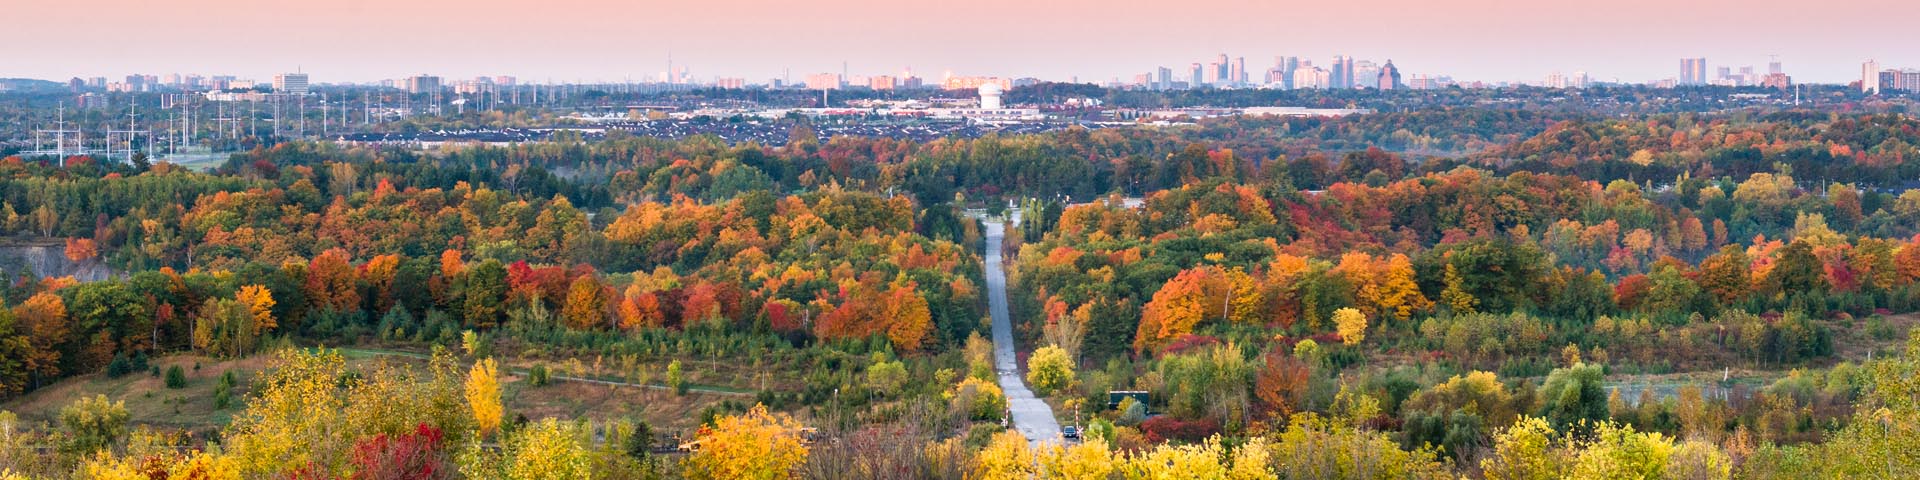 Landscape photo of Rouge National Urban Park in the fall, with the trees turning shades of yellow, orange and red. In the distance the skyline of Toronto is visible with its tall buildings. The sky is the pinky yellow of a sunrise, with a slight haze to it.